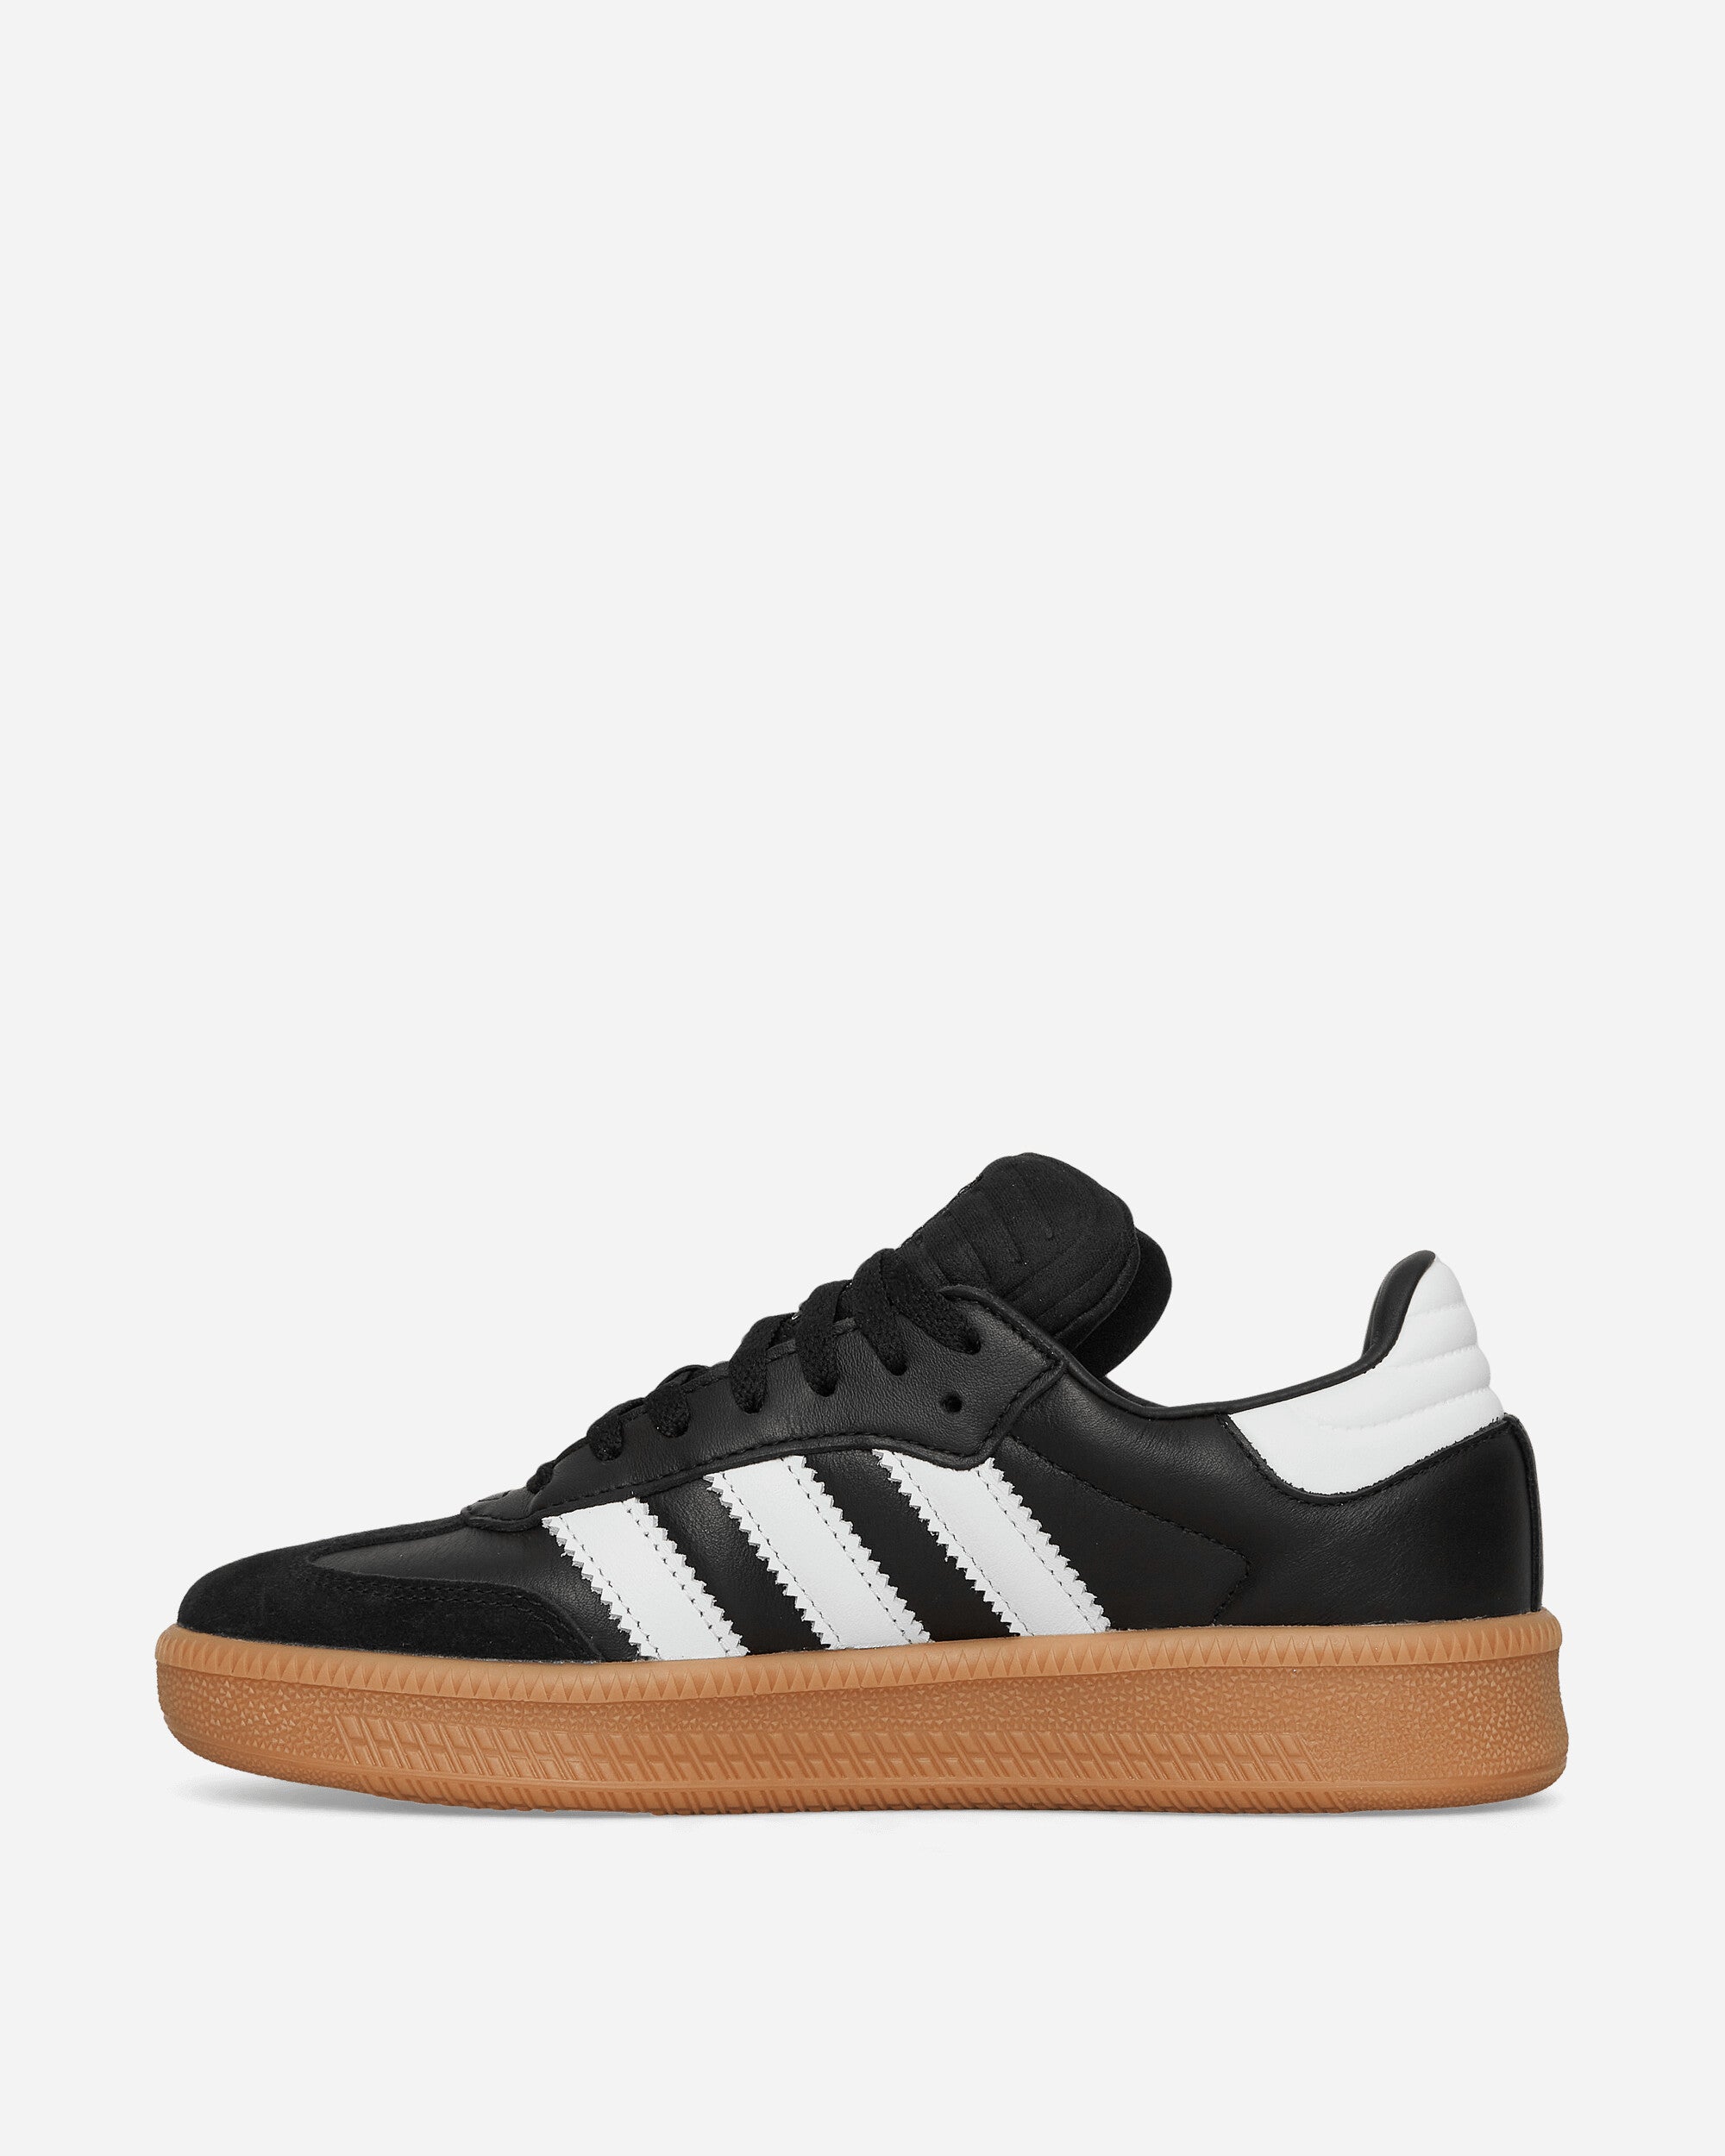 adidas Samba Xlg Core Black/Ftwr White Sneakers Low IE1379 001